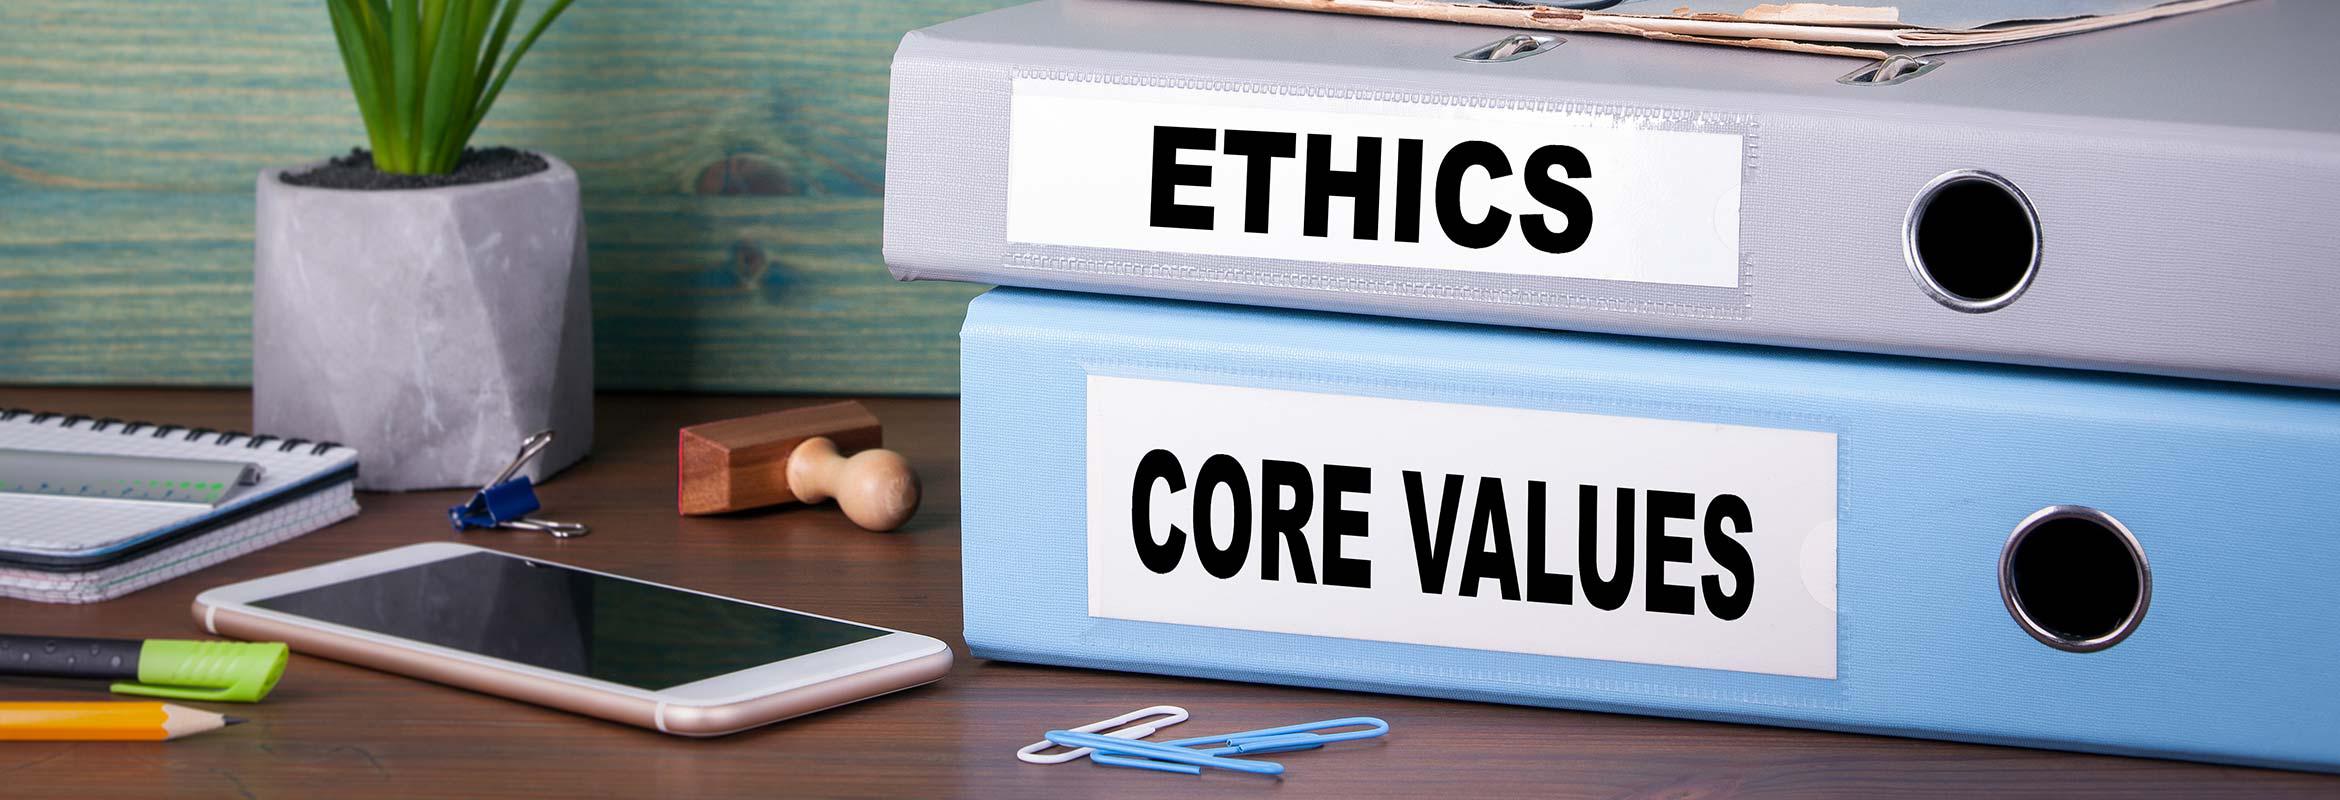 Image of a smartphone and binders with the words ethics and core values.